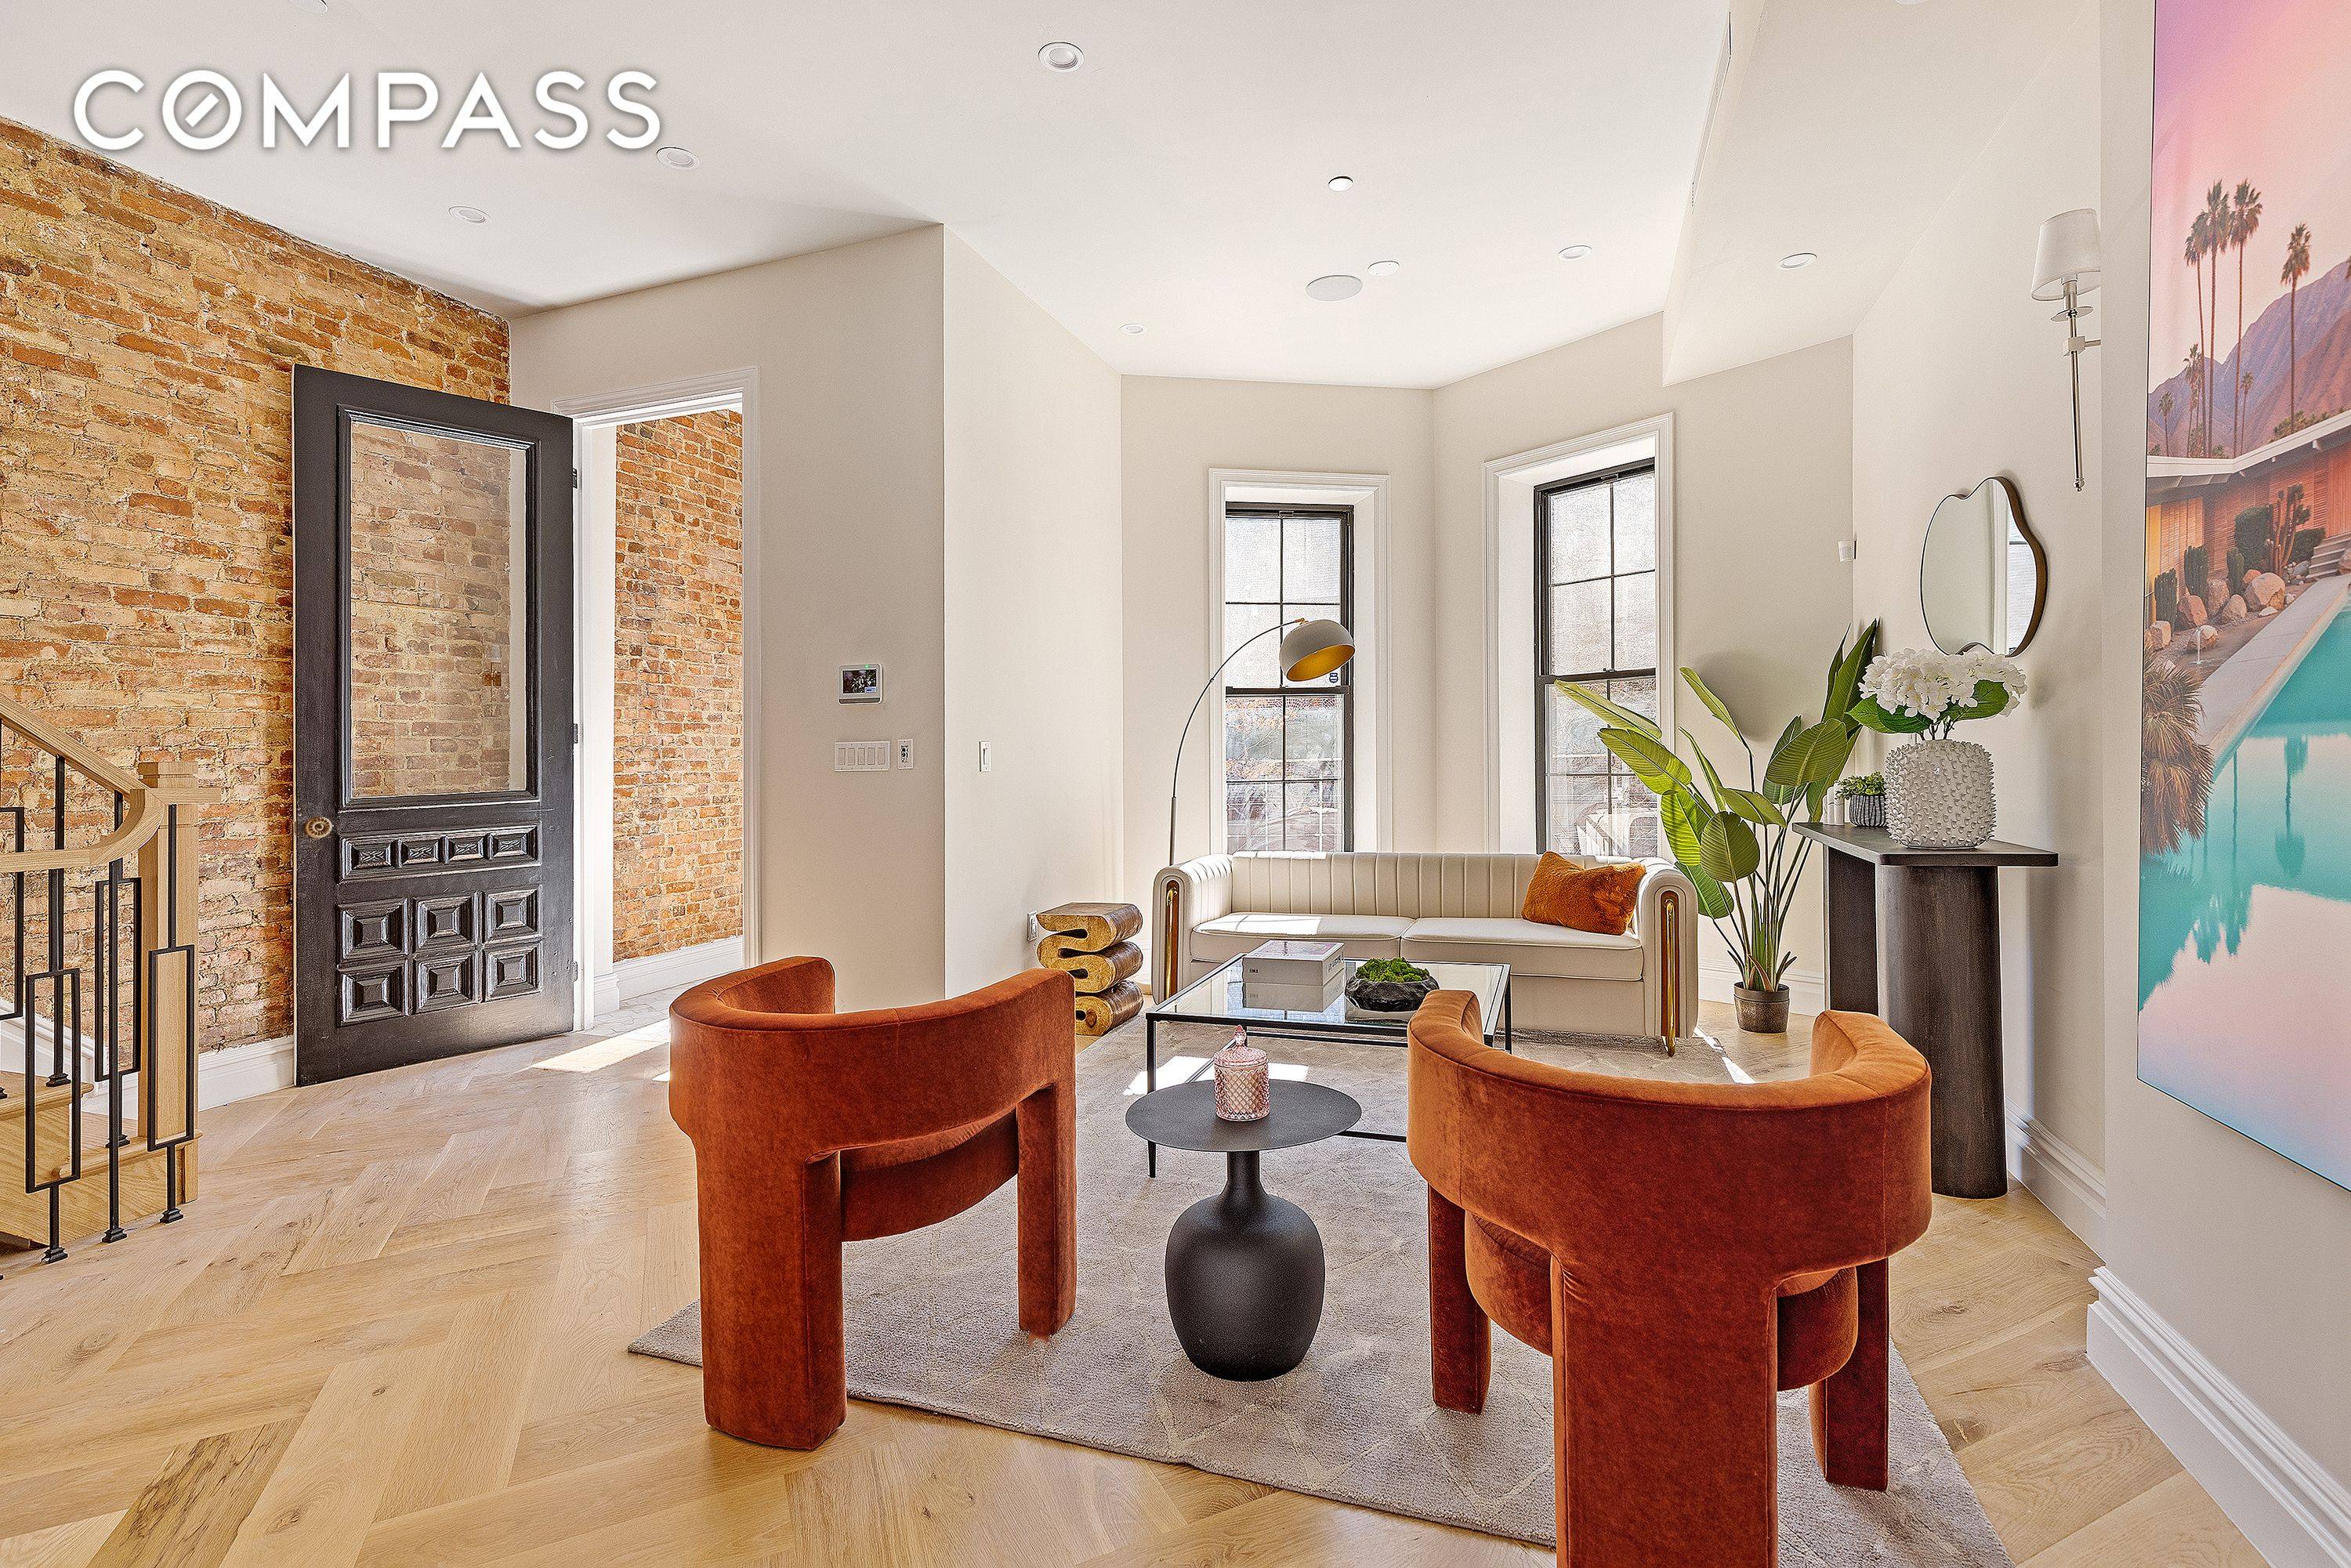 609 Putnam Ave is a rare 20 ft x 45 ft 4 story Brownstone nestled on a quintessential Brownstone block in Brooklyn.